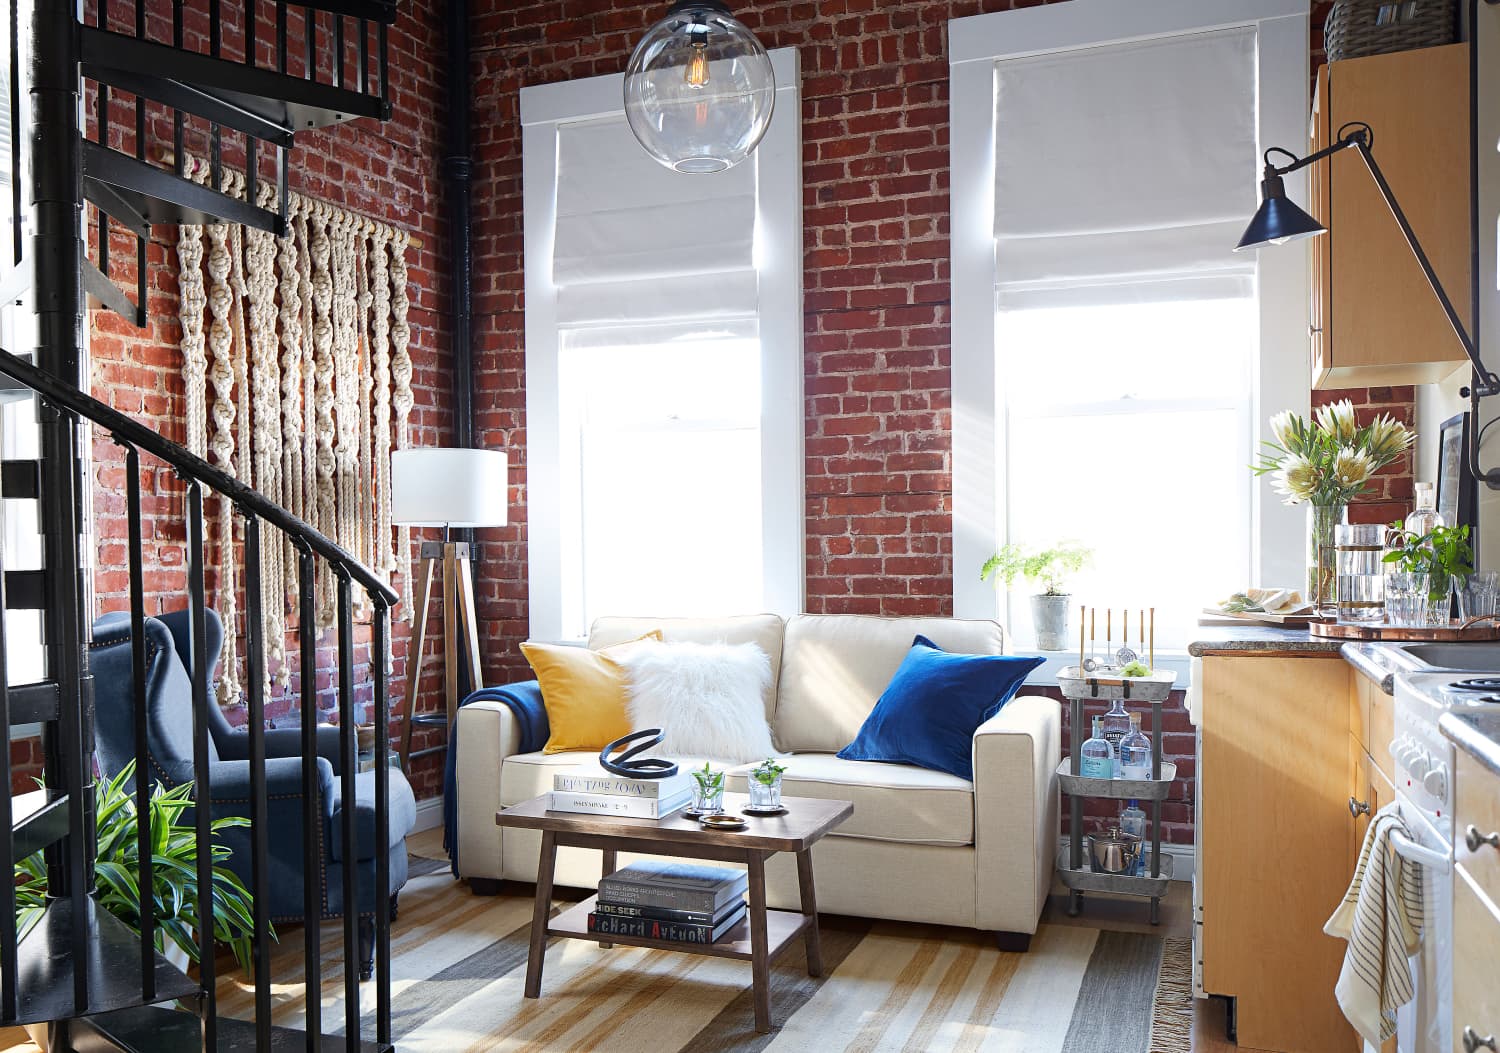 Pottery Barn Launches PB Apartment To Focus on Small Spaces